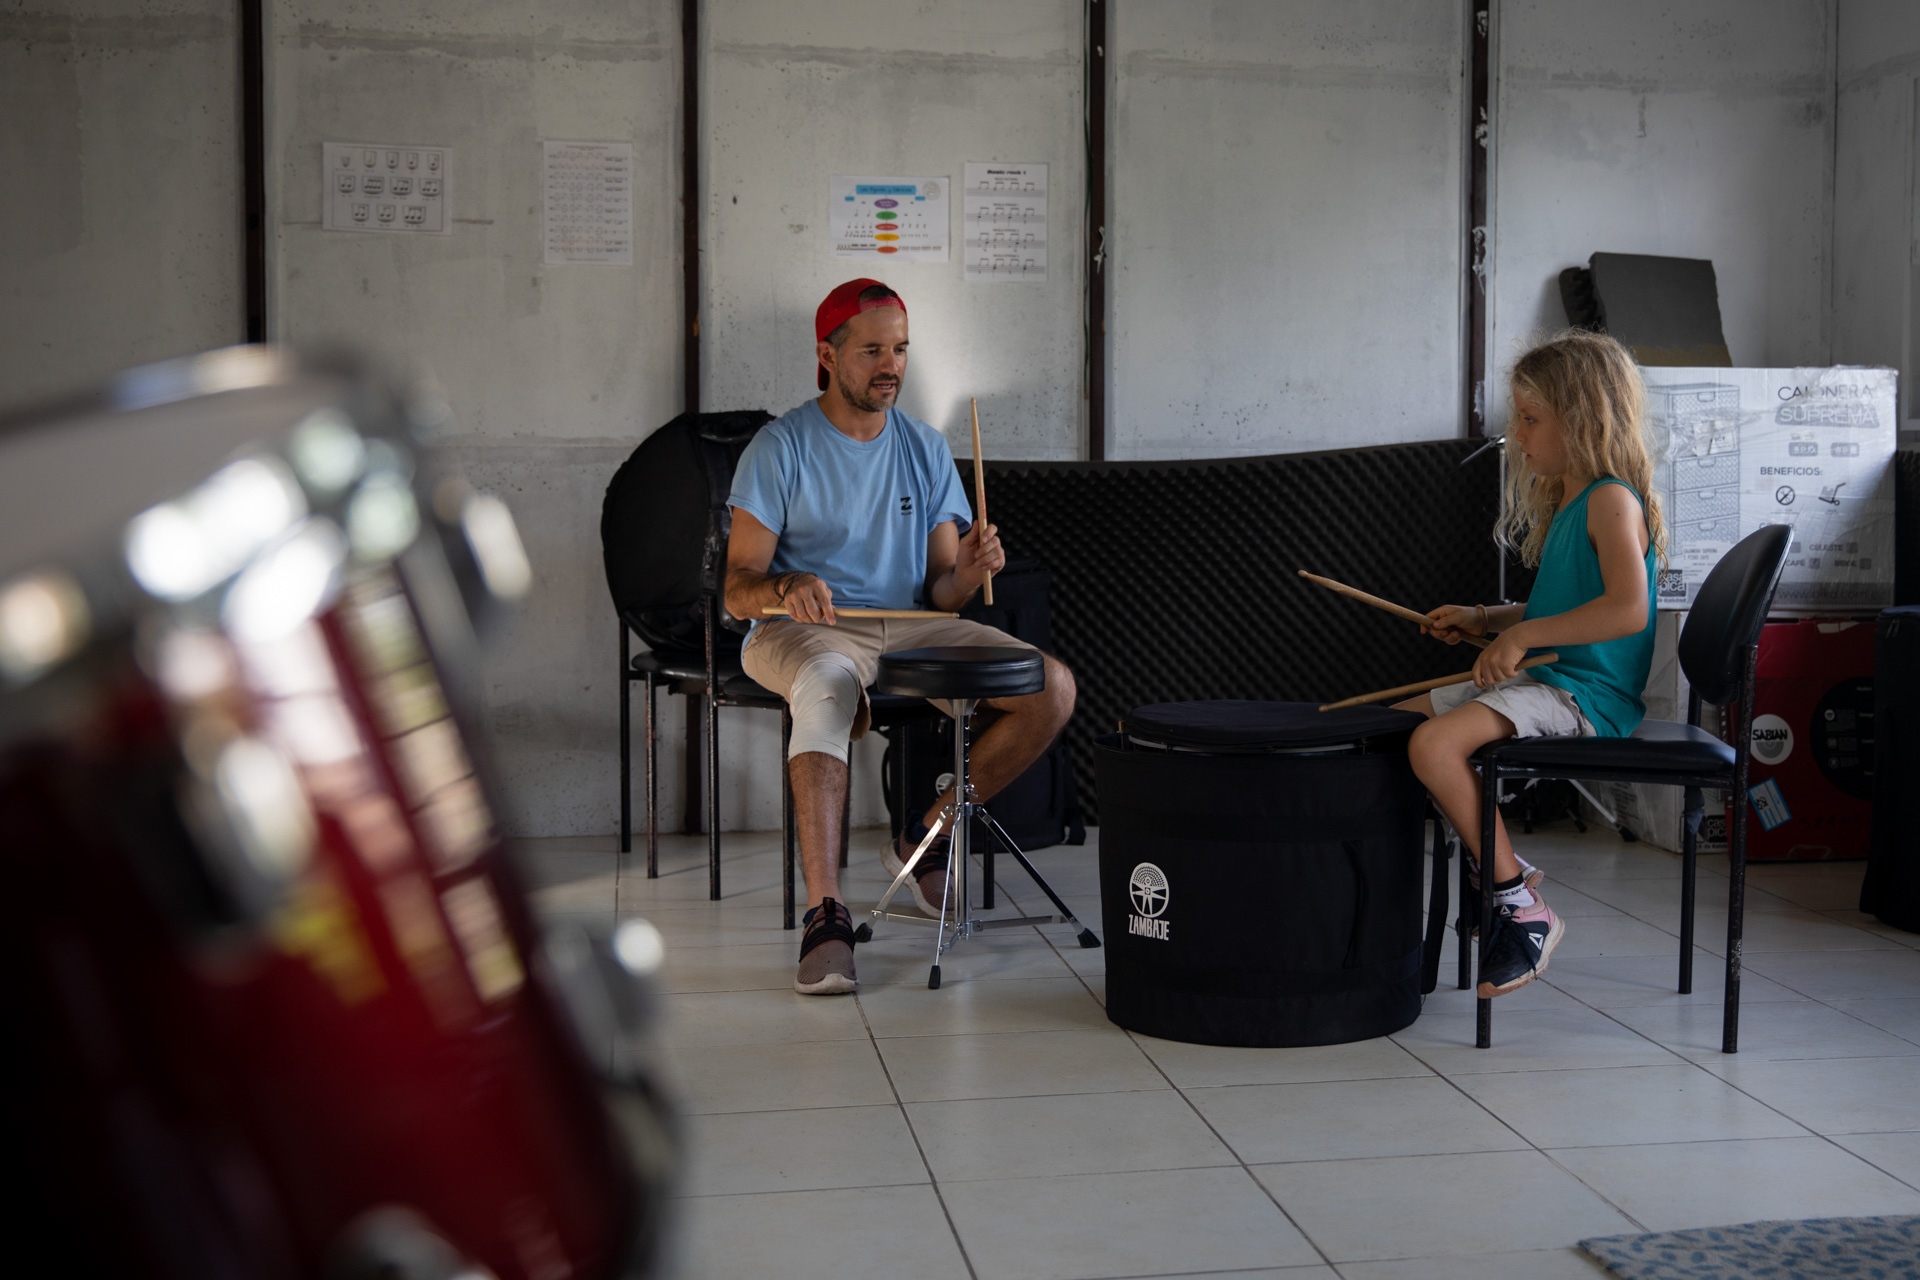 Gonzalo Fernandez and a young girl both are holding drumsticks and playing the drums during one of his classes